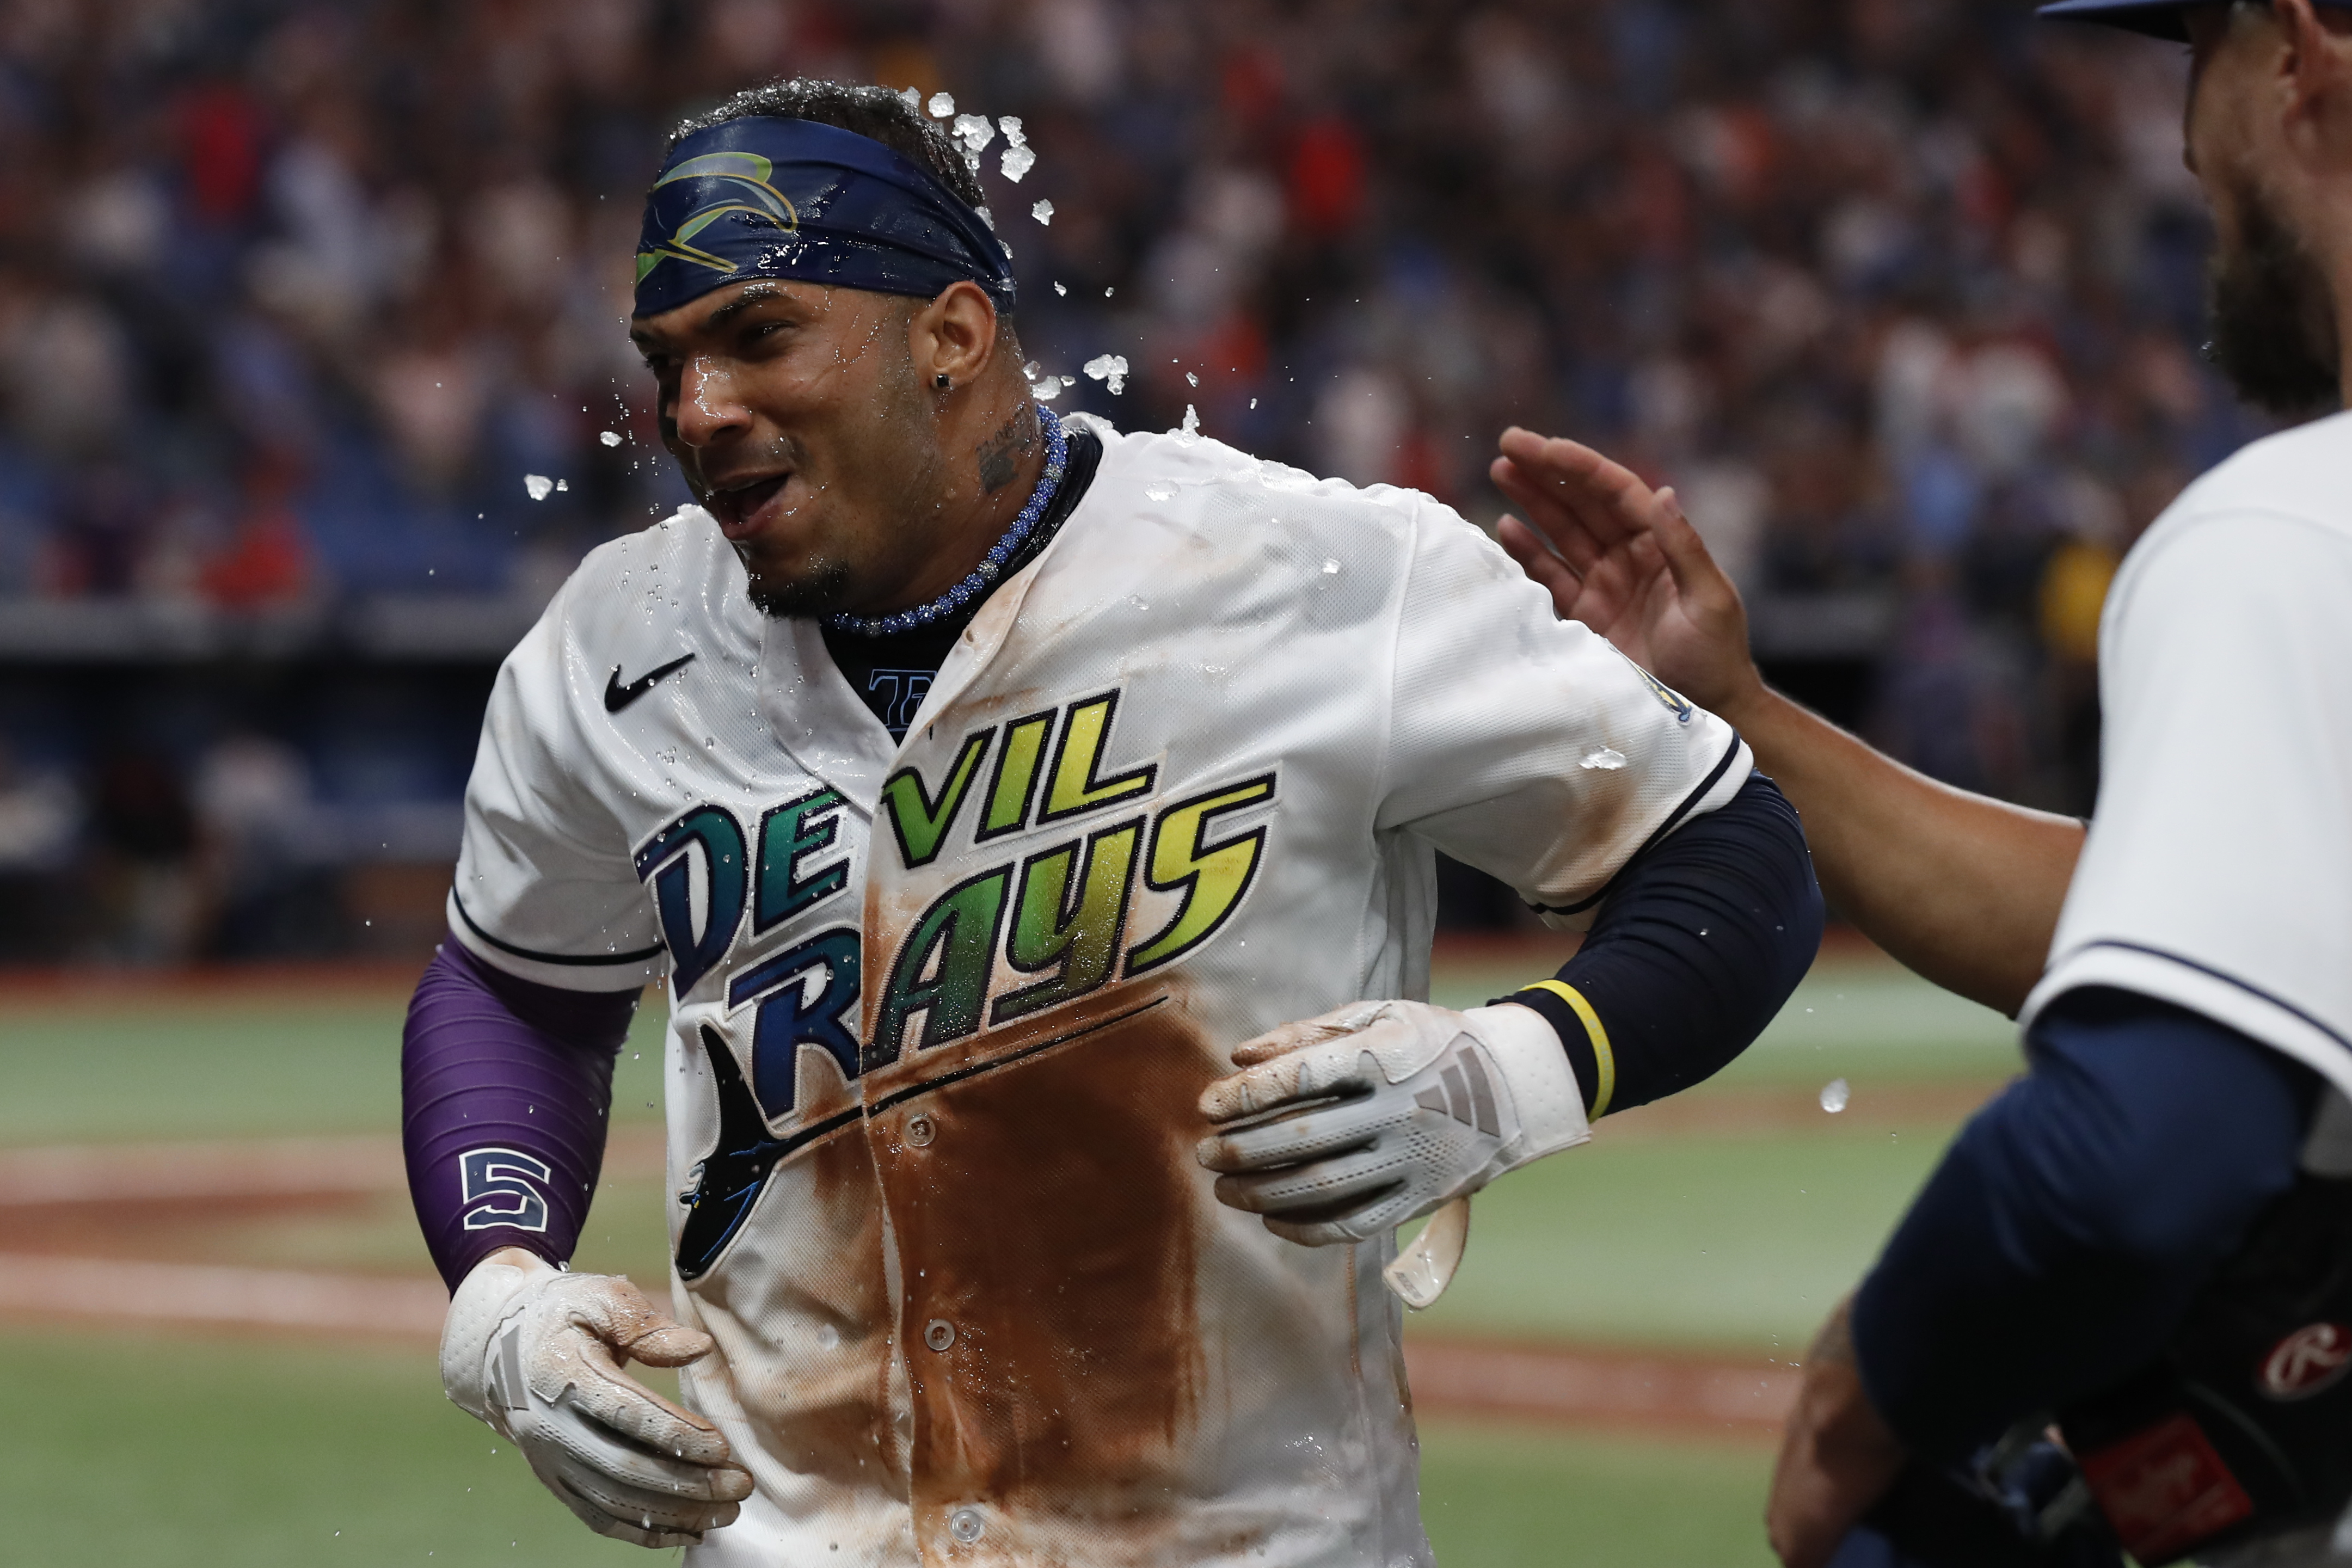 Dominican authorities investigate Rays' Wander Franco for an alleged  relationship with a minor